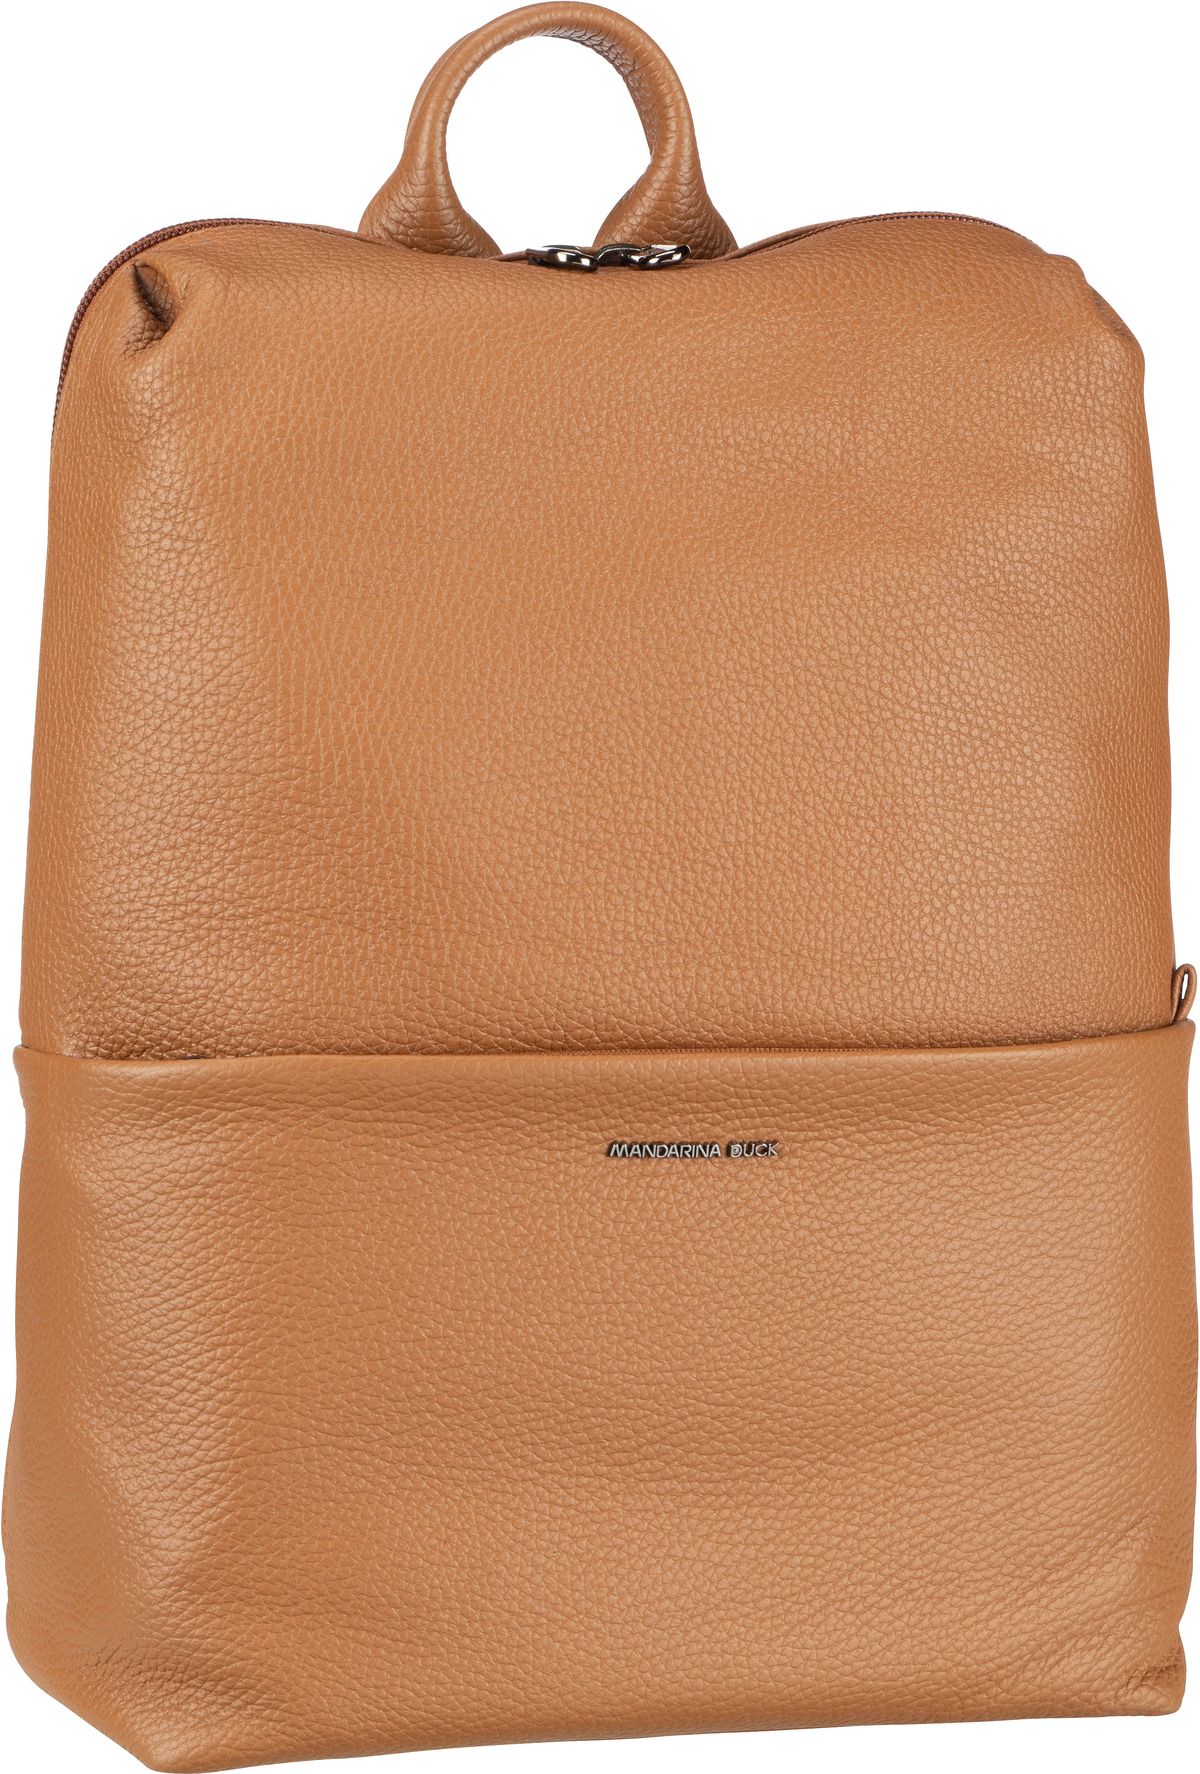 Mandarina Duck Mellow Leather Squared Backpack FZT38 - Indian Tan